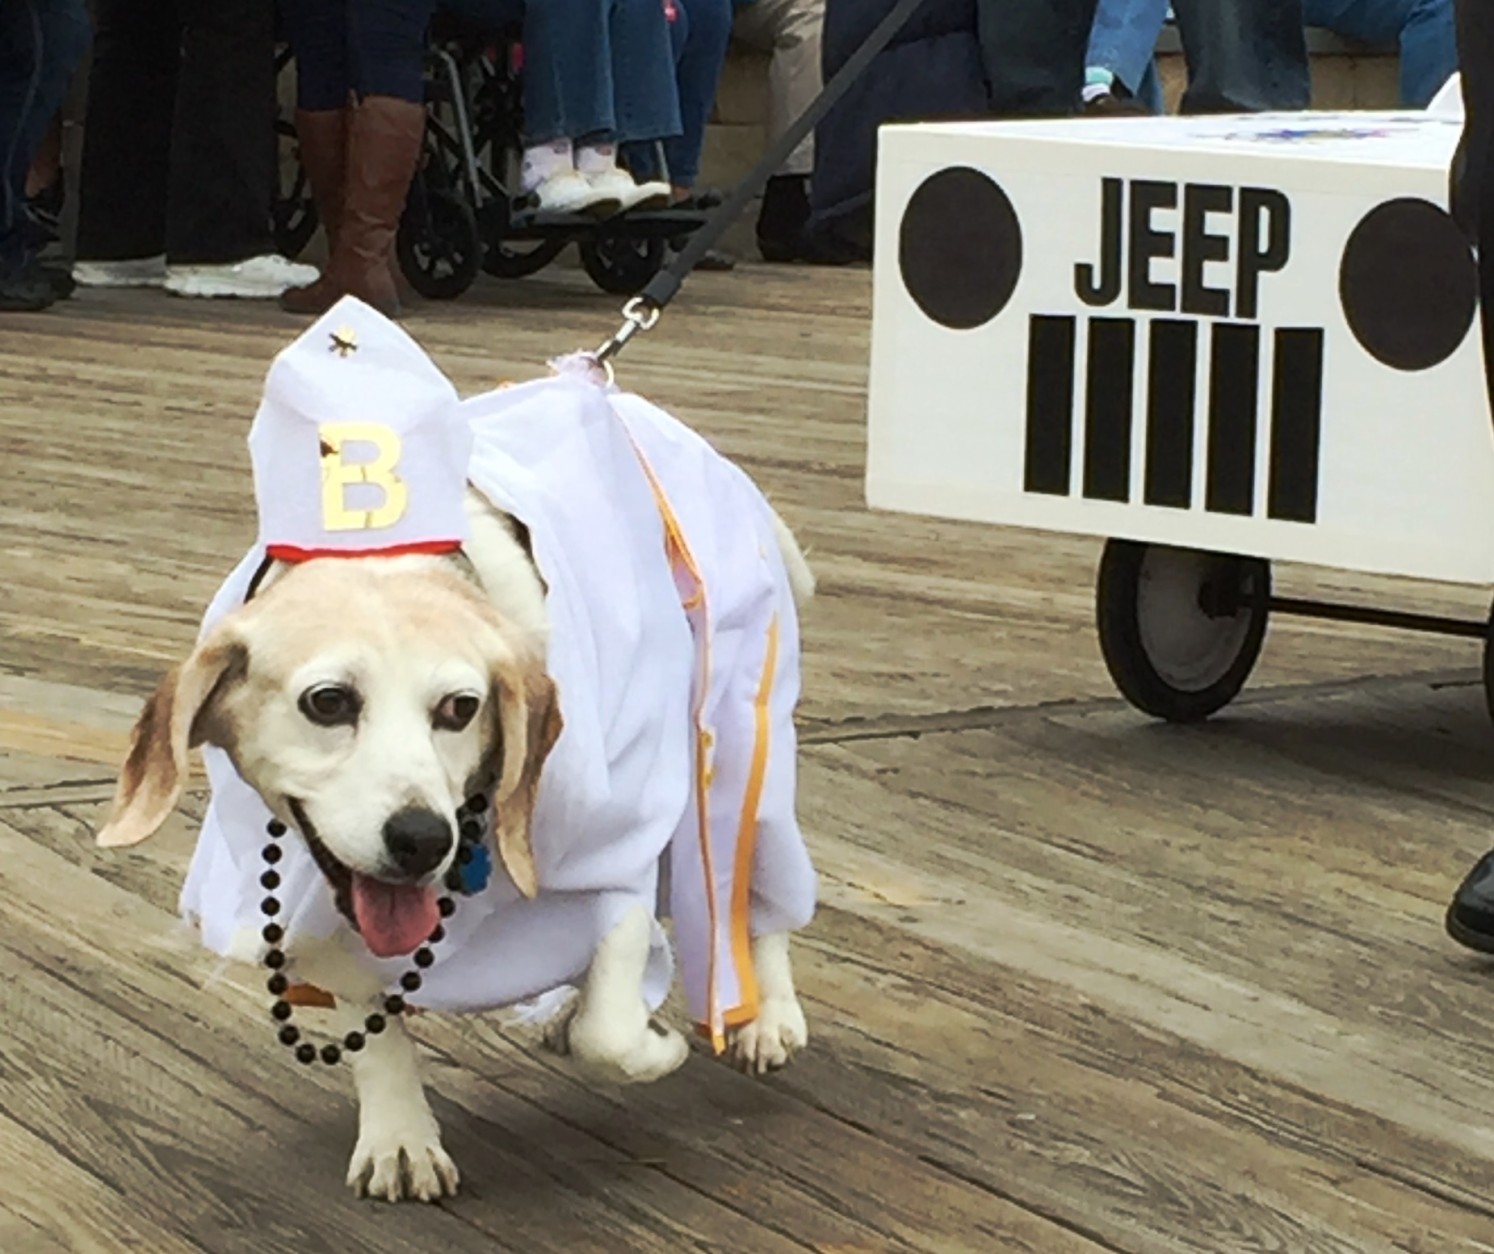 

Dogs in costume turned out for the Sea Witch Monsters Parade 2015 in Rehoboth, Delaware. (WTOP/Molly Welton)
